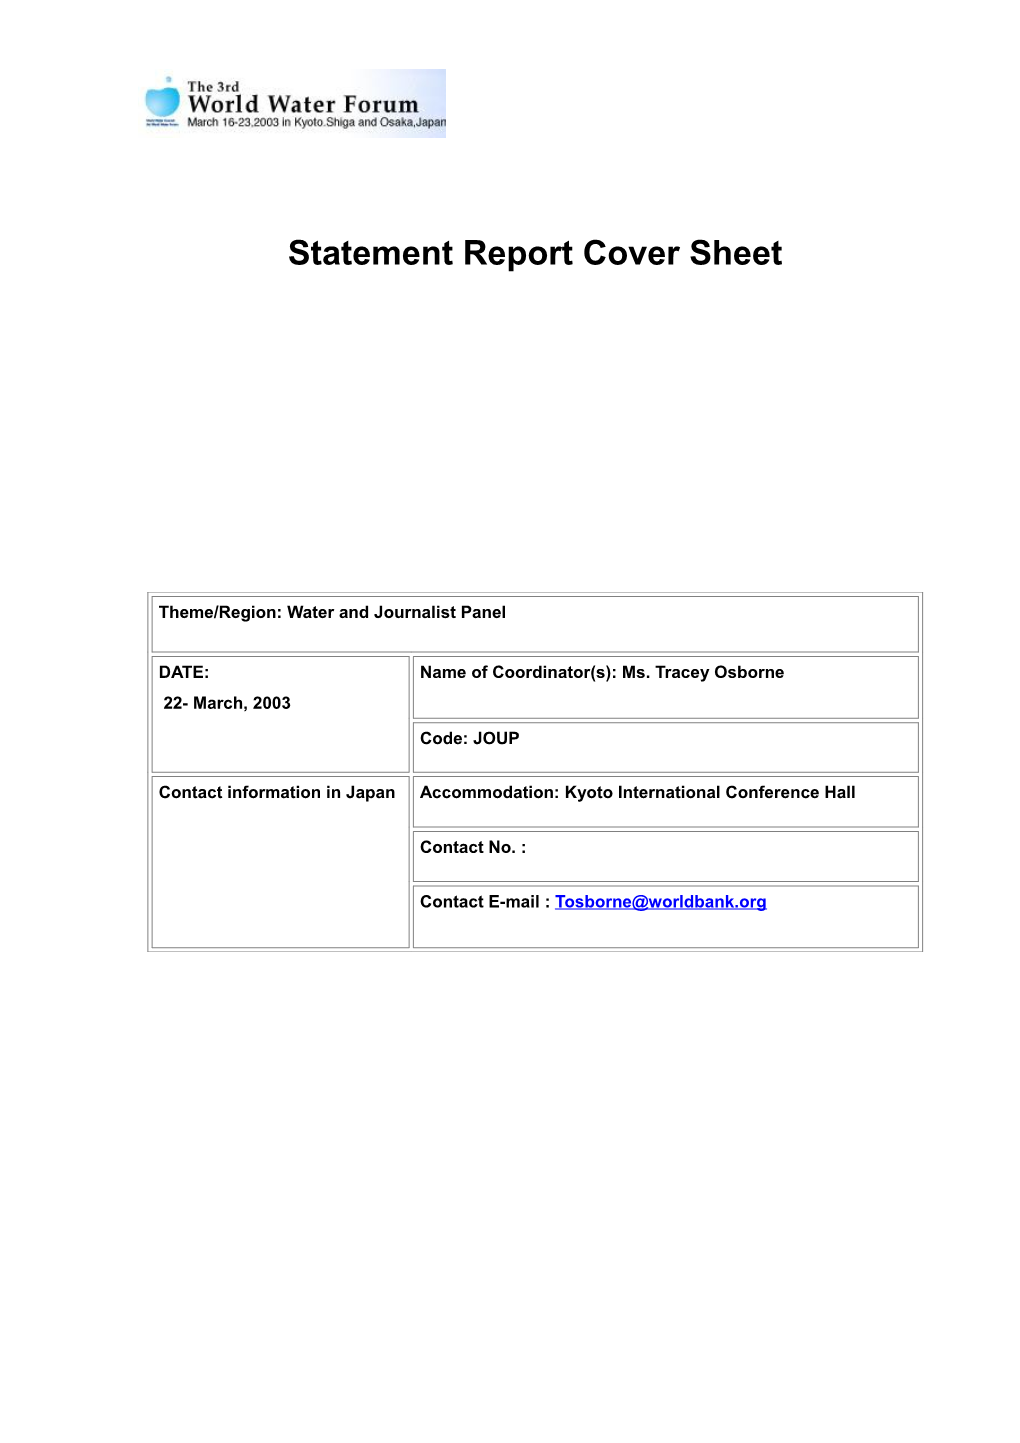 Statement Report Cover Sheet